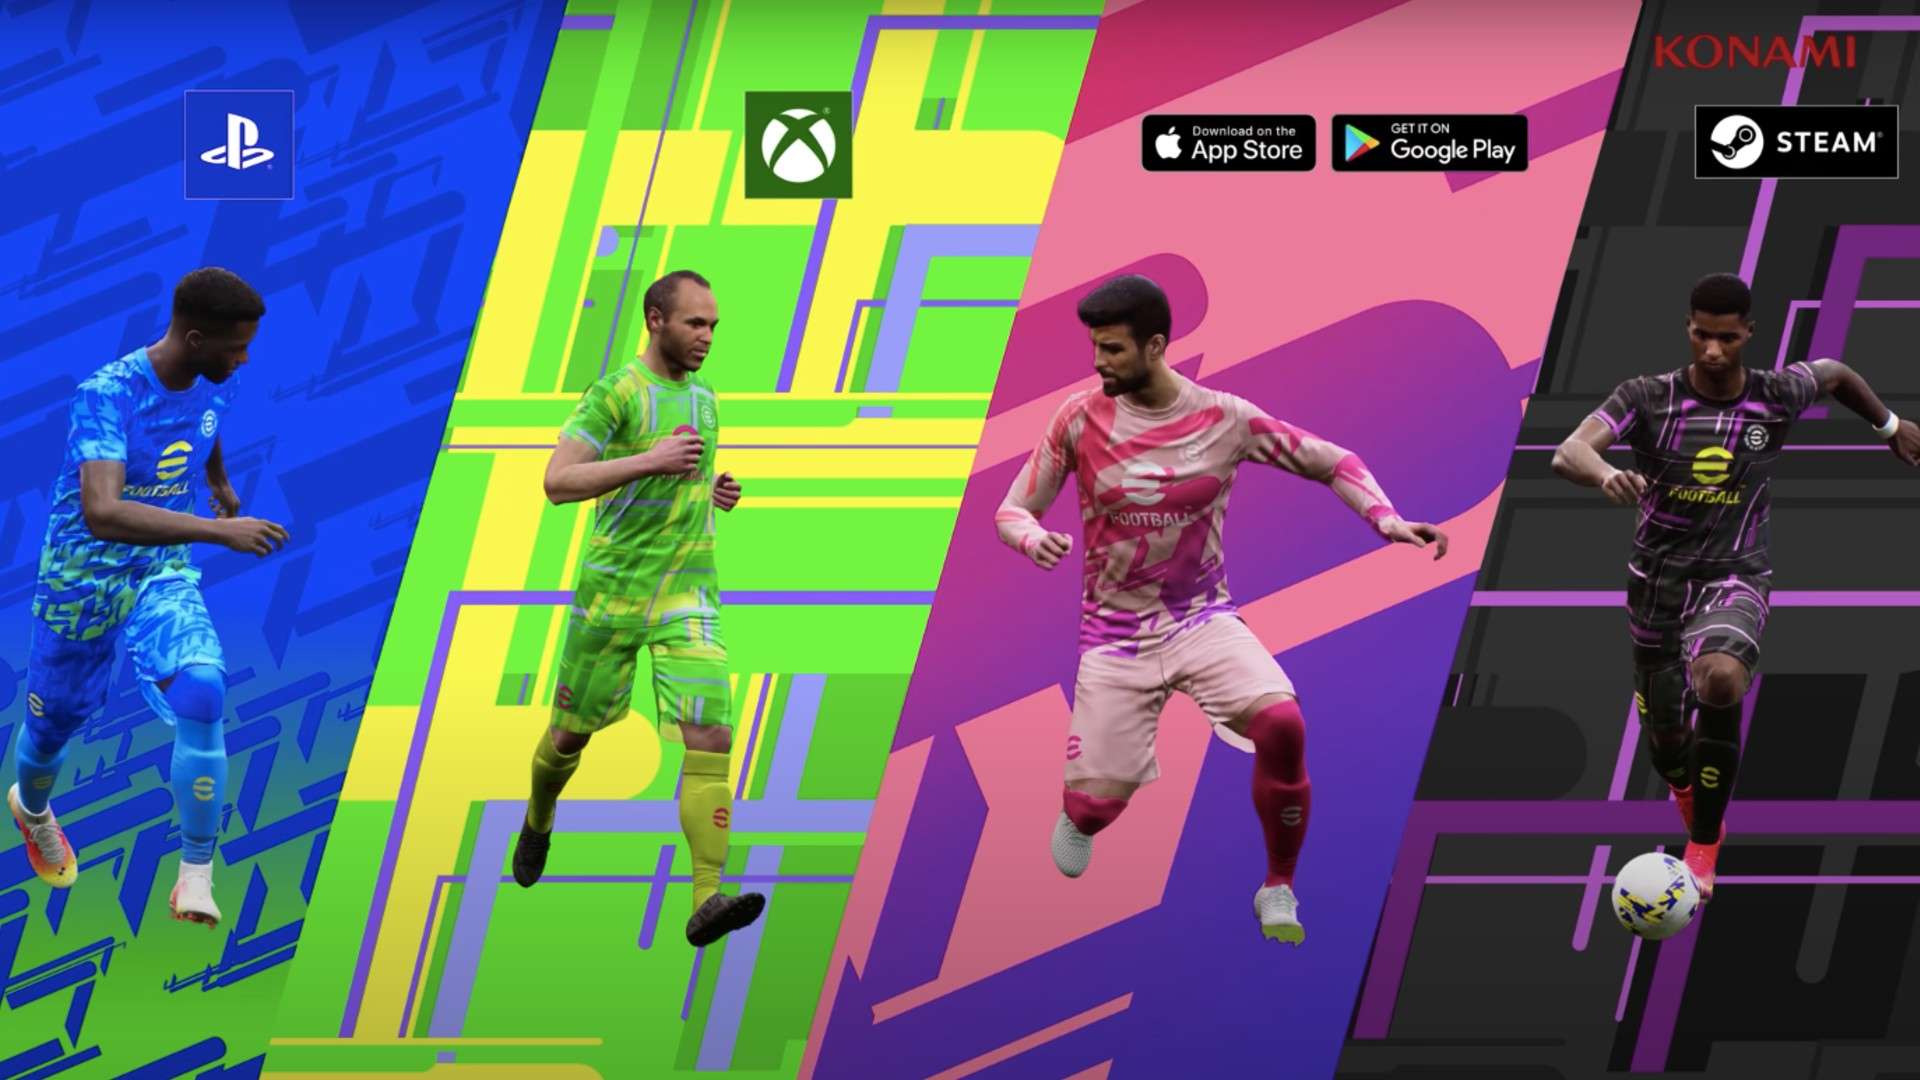 EFootball: Release Date, Price, Licences & Guide To Free To Play PES Replacement Game